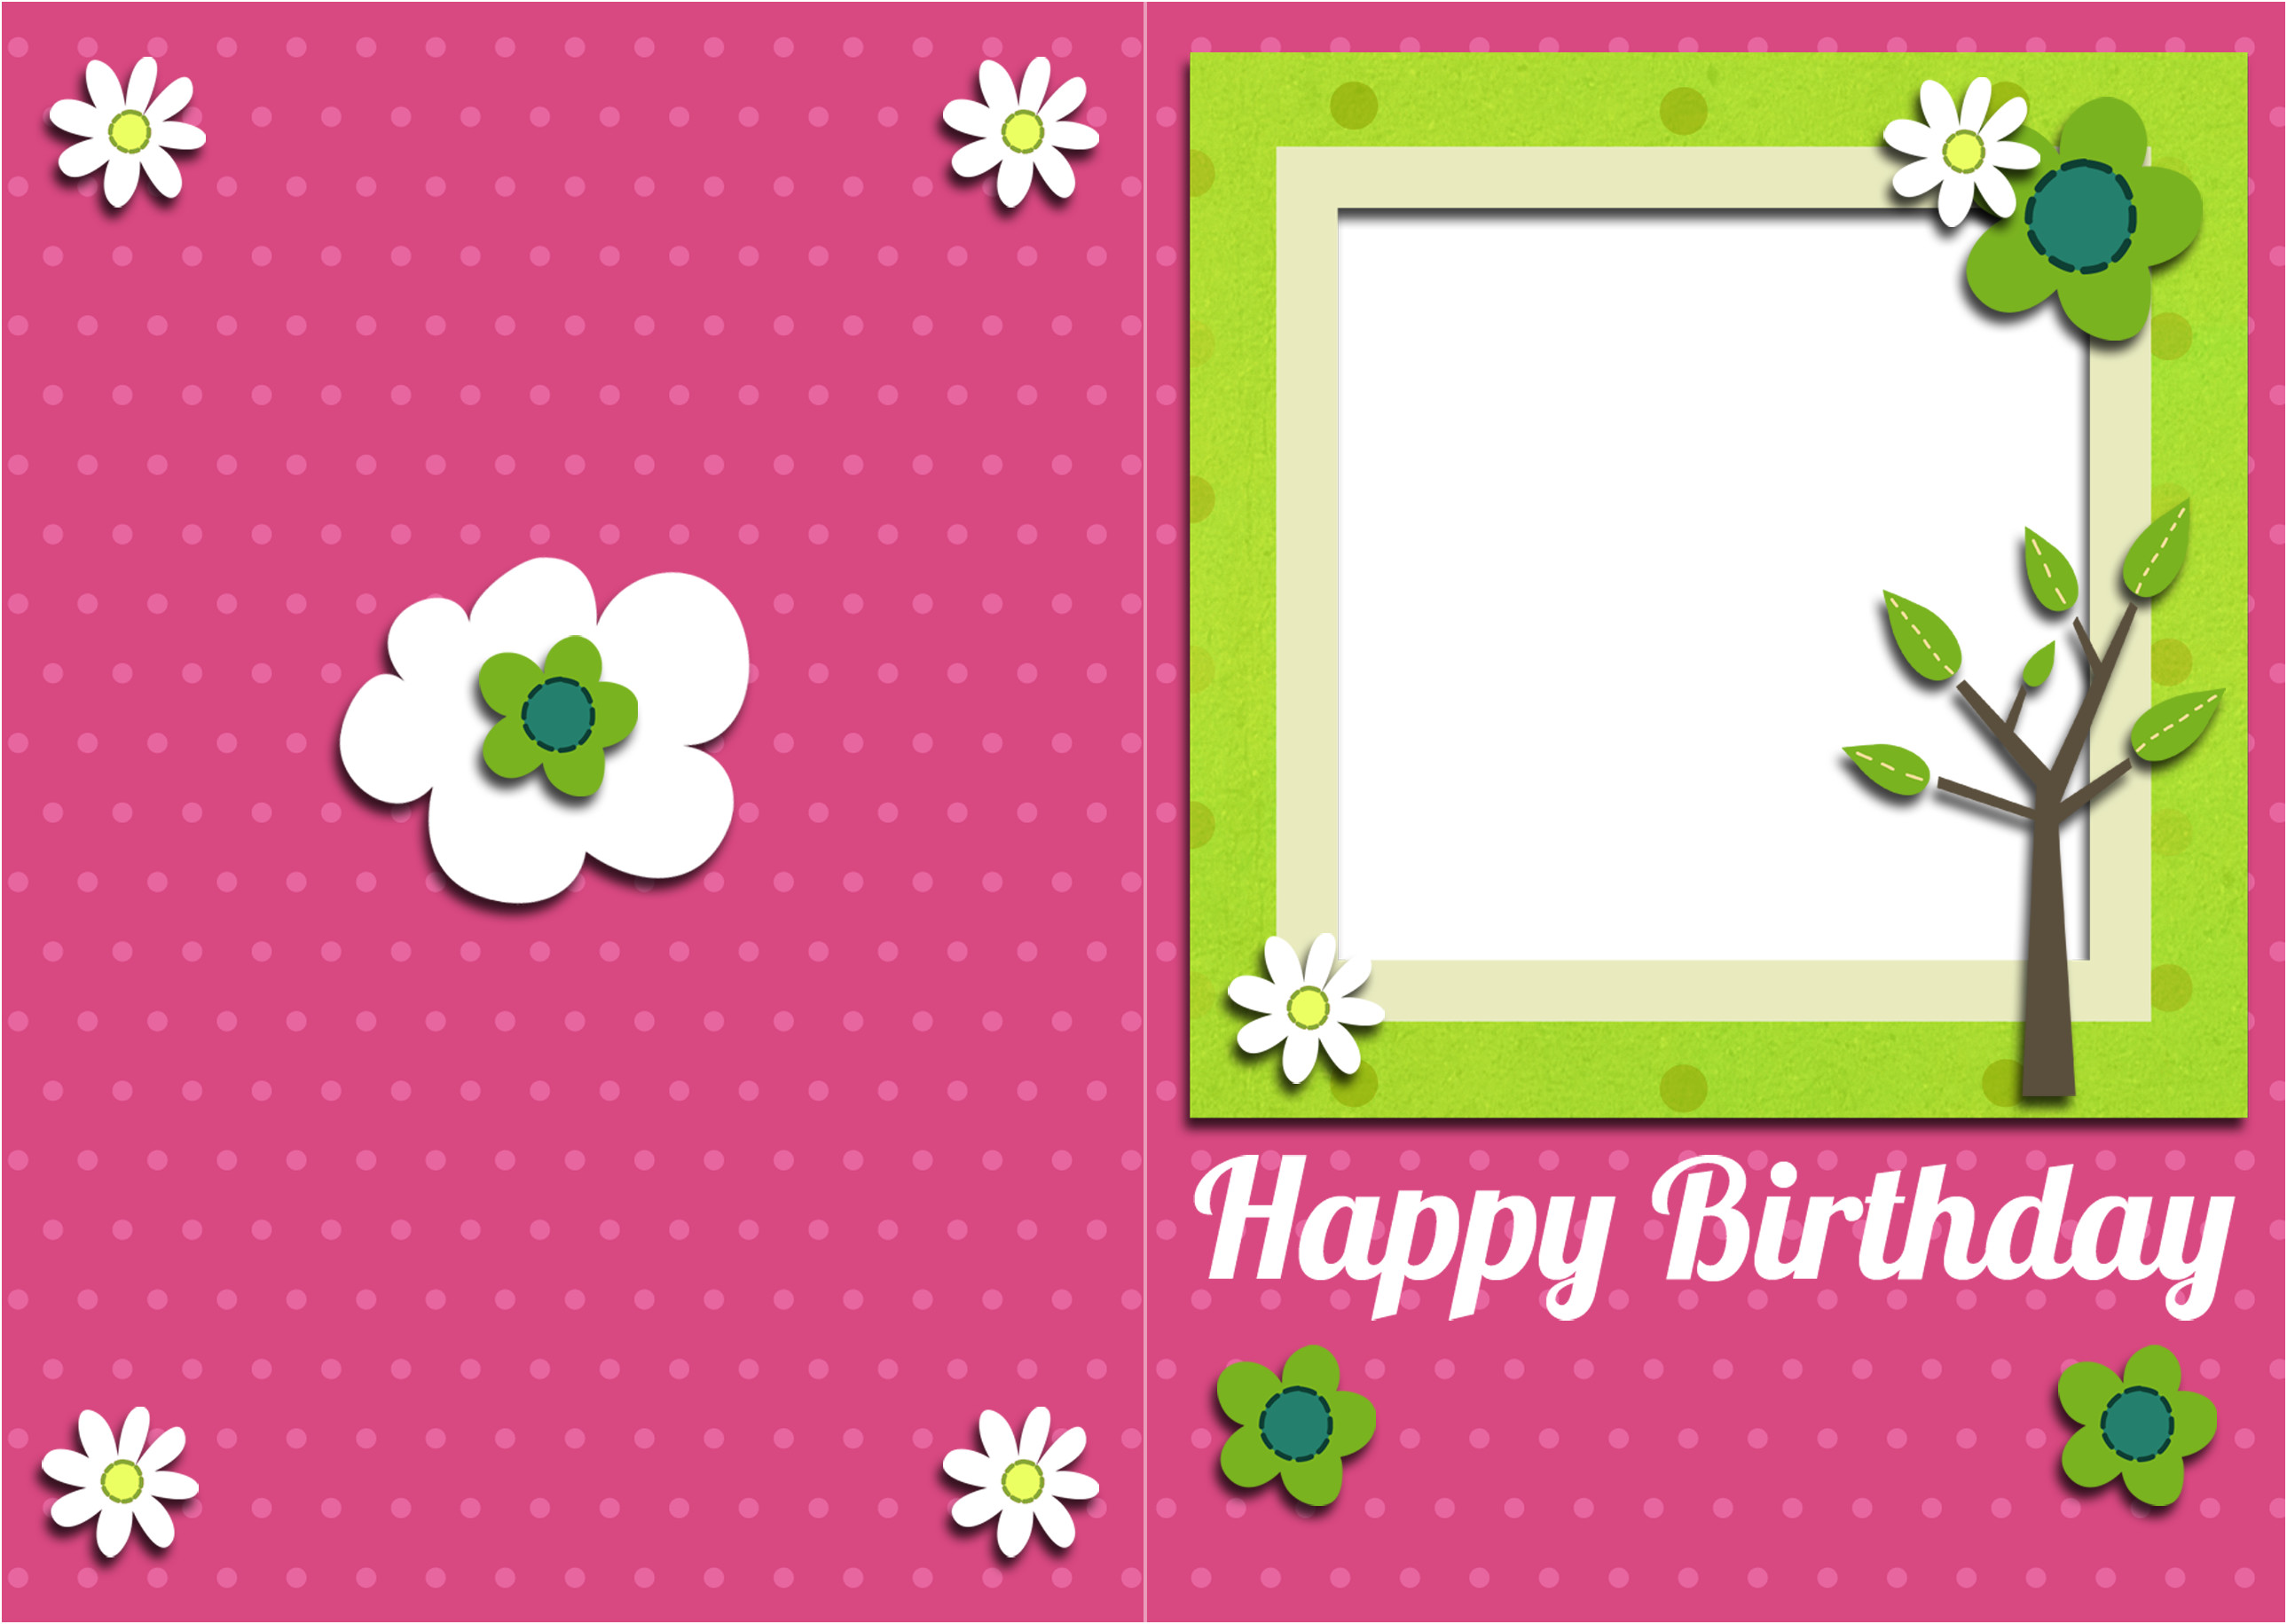 birthday-card-backgrounds-wallpapertag